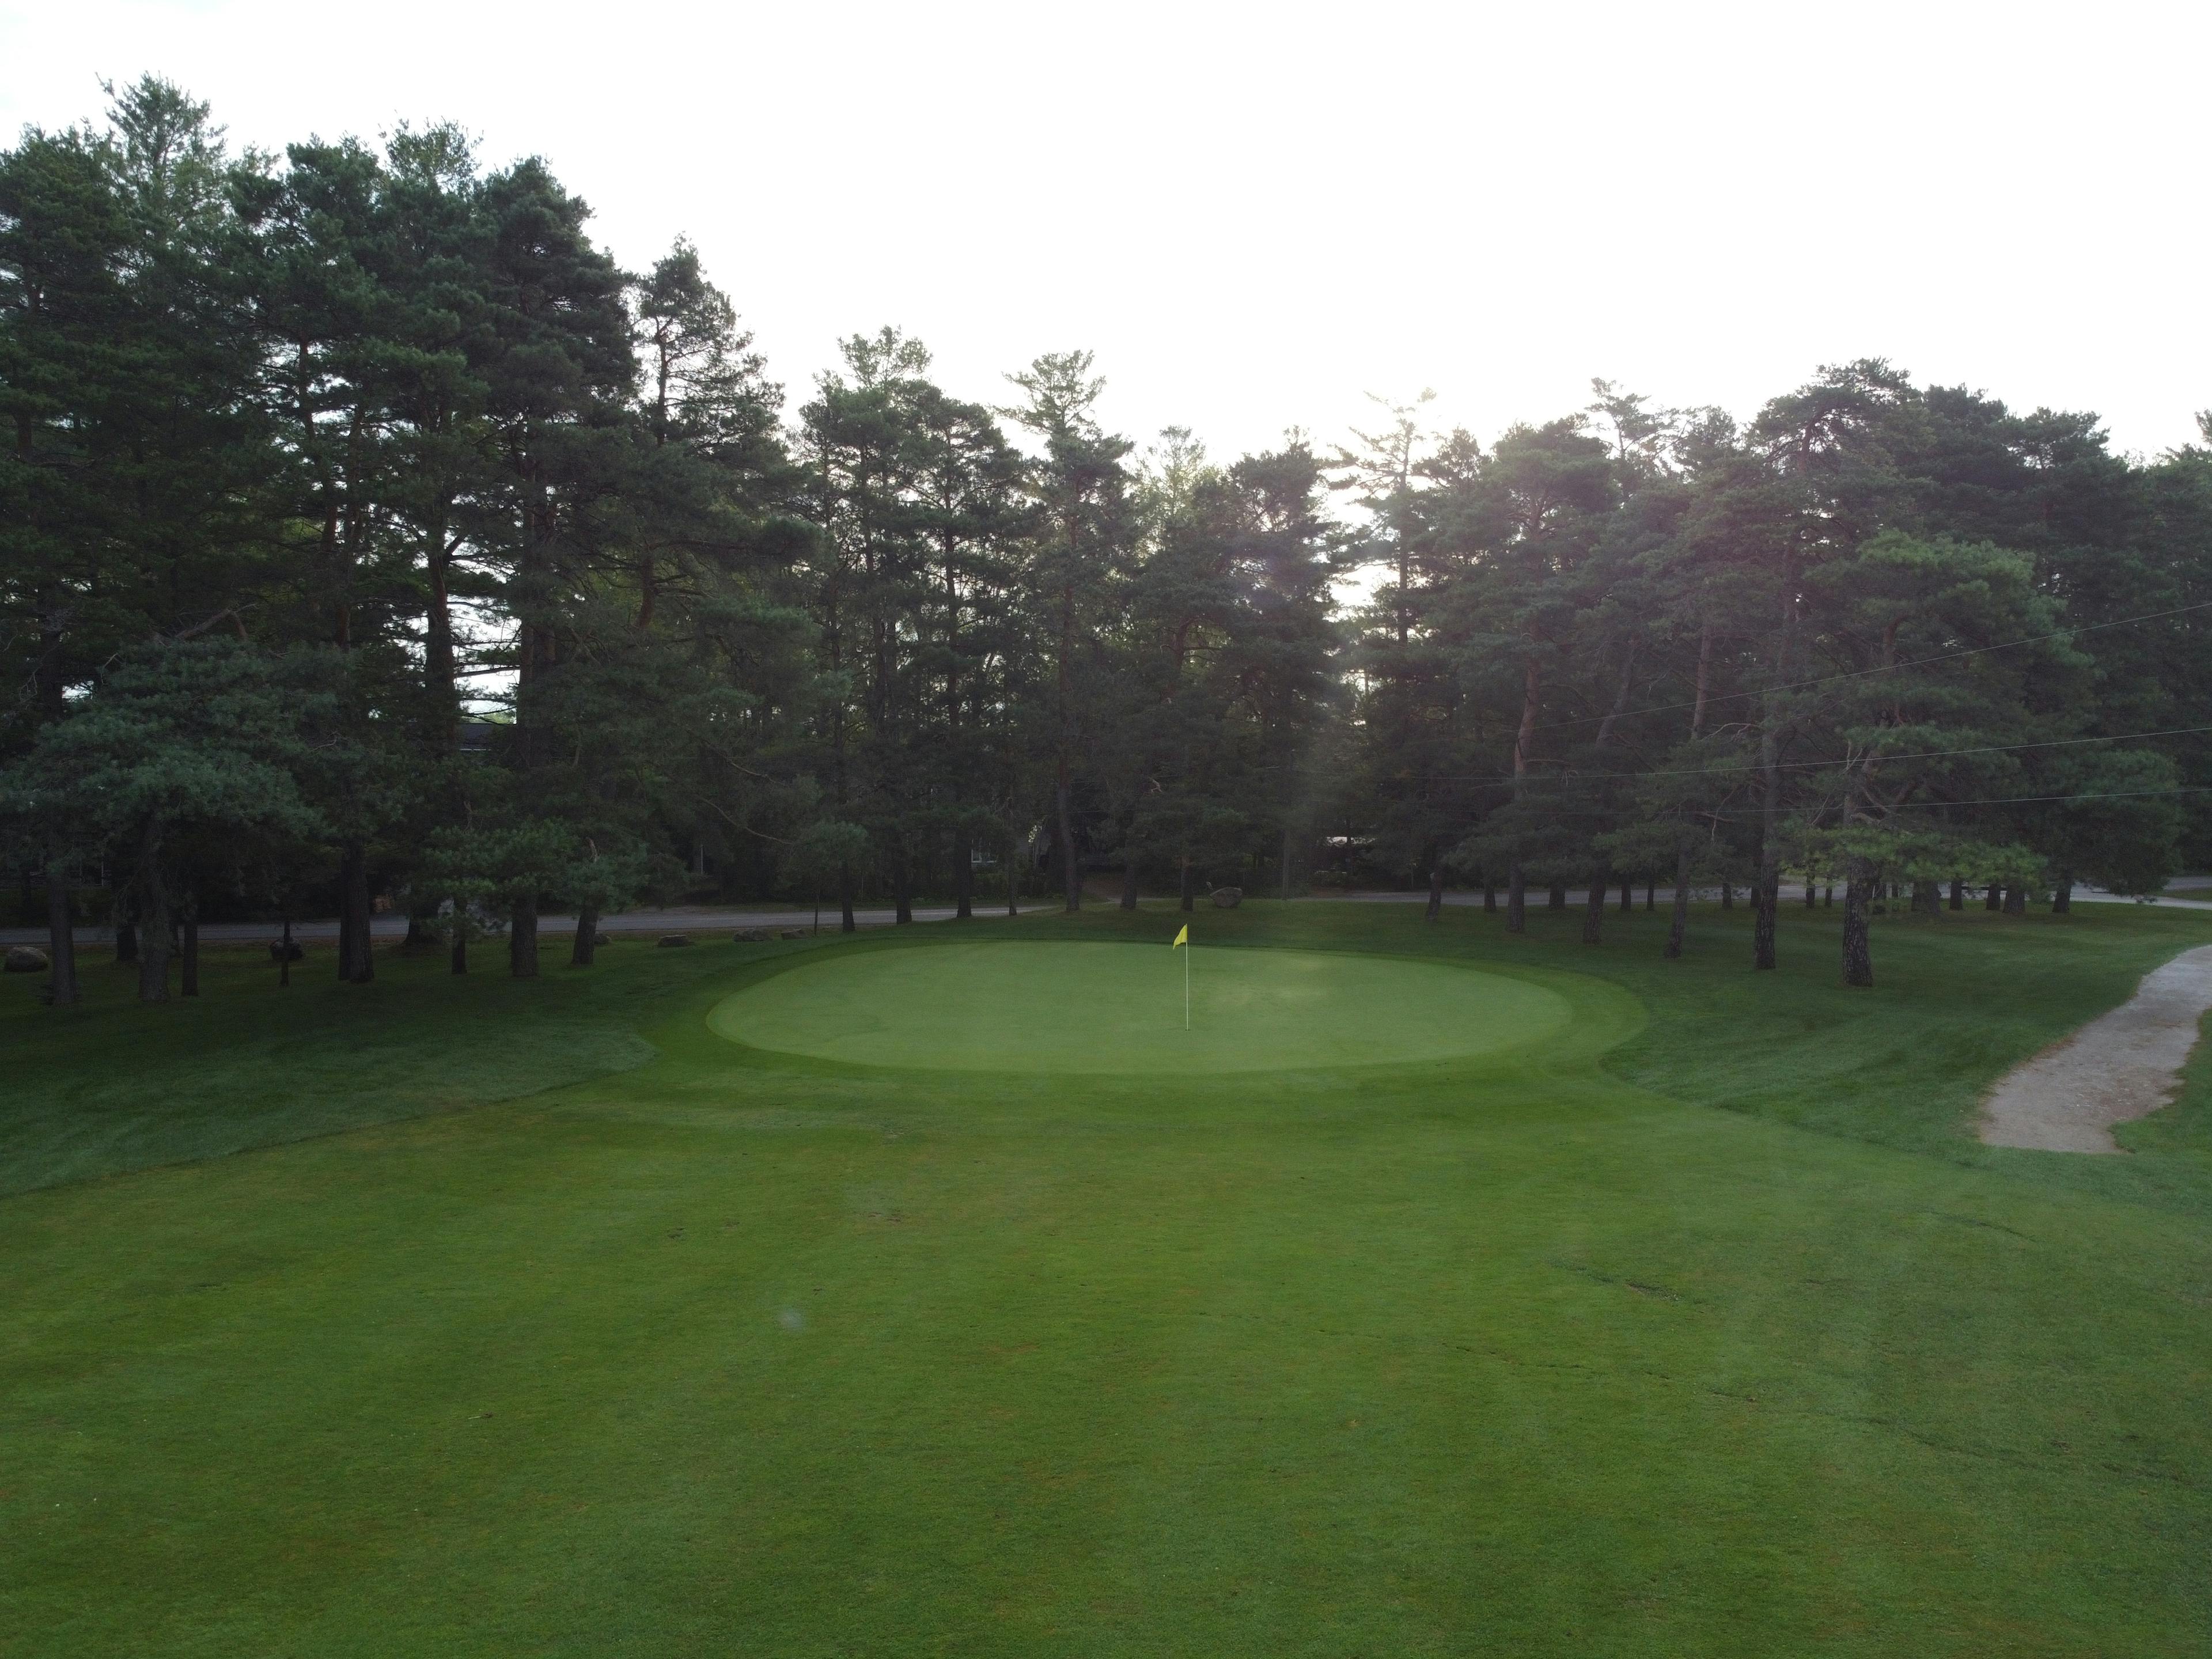 Hole number 8 on the North course